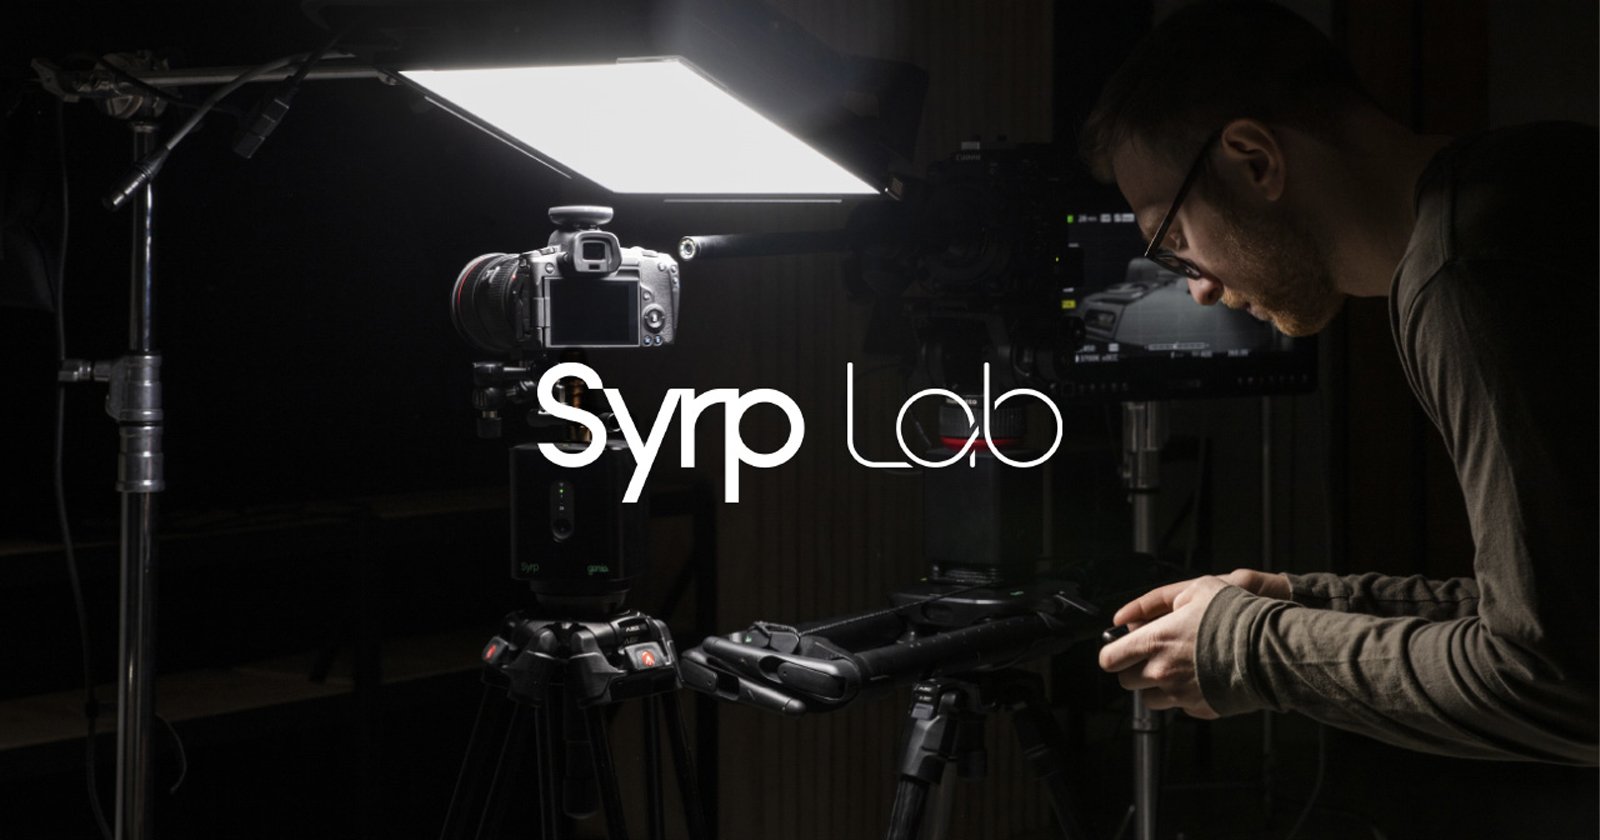 Syrp restructuring, rebranding to syrp lab